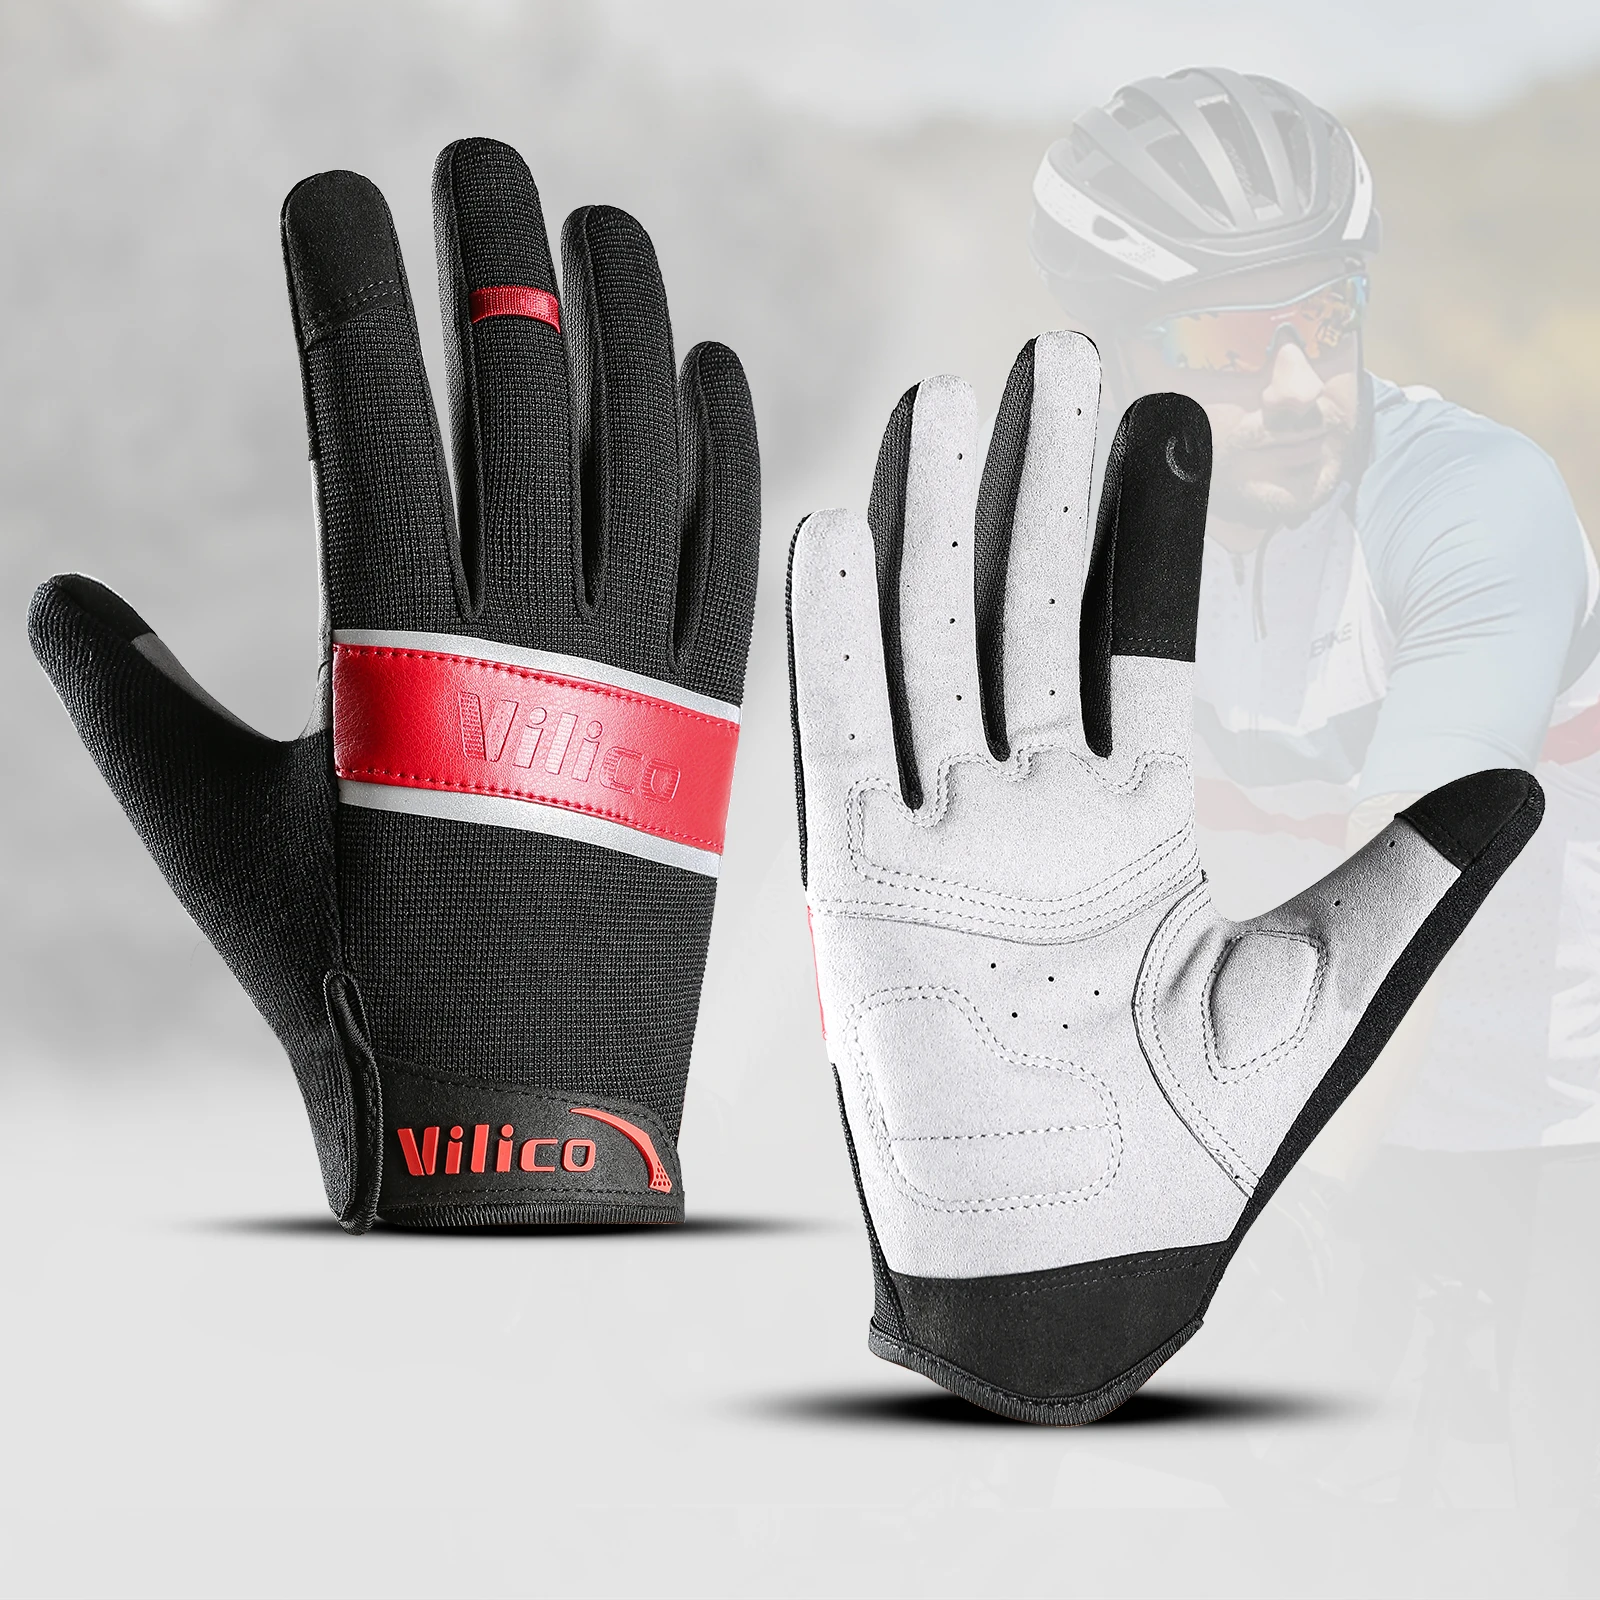 

Kyncilor Professional Outdoor Cycling Fitness Running Comfortable Breathable Anti slip Wear-resistant and Shock-absorbing Gloves